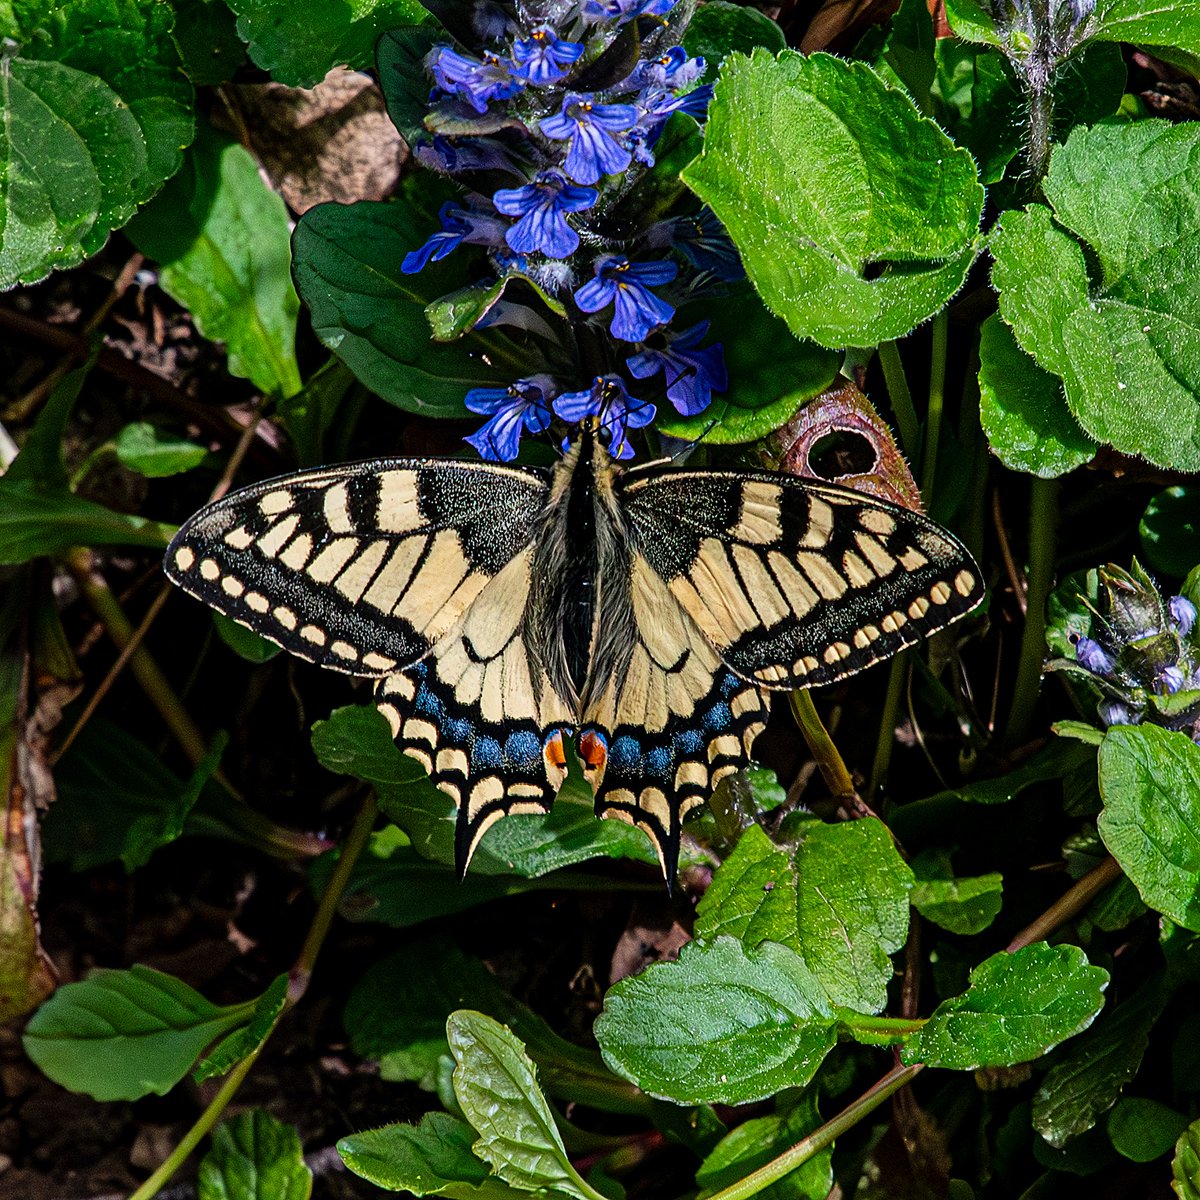 #XNatureCommunity #XNaturePhotography #TwitterNatureCommunity #TwitterNaturePhotography #NaturePhotography #NatureBeauty #Butterfly #butterflies #swallowtail 
This beautiful and lovely swallowtail is for you. Nature's amazing! 😍